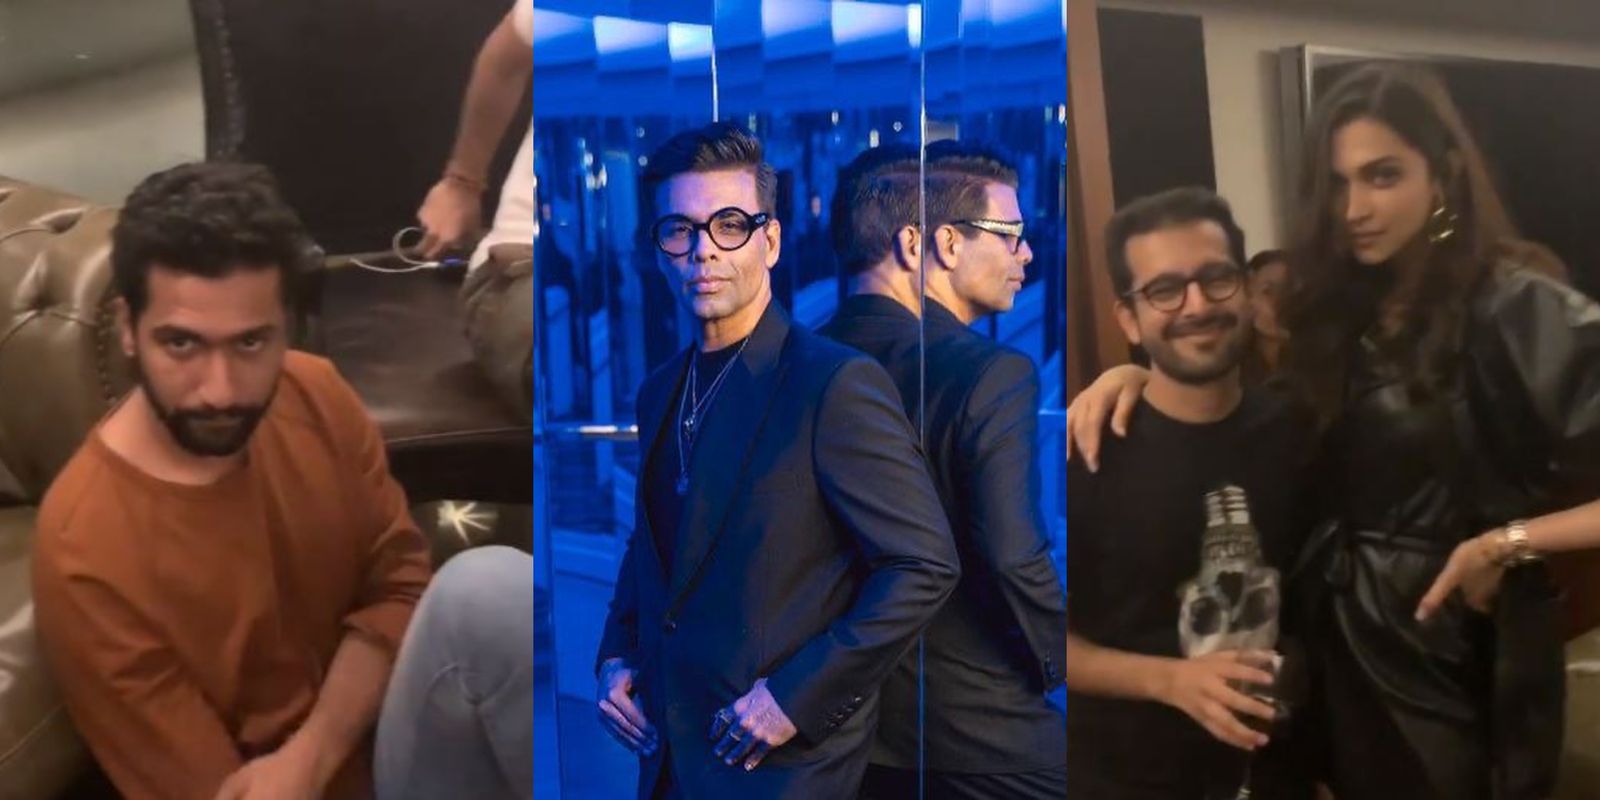 NCB To Summon Actors In Karan Johar’s Party Video After Re-Examining It: Reports